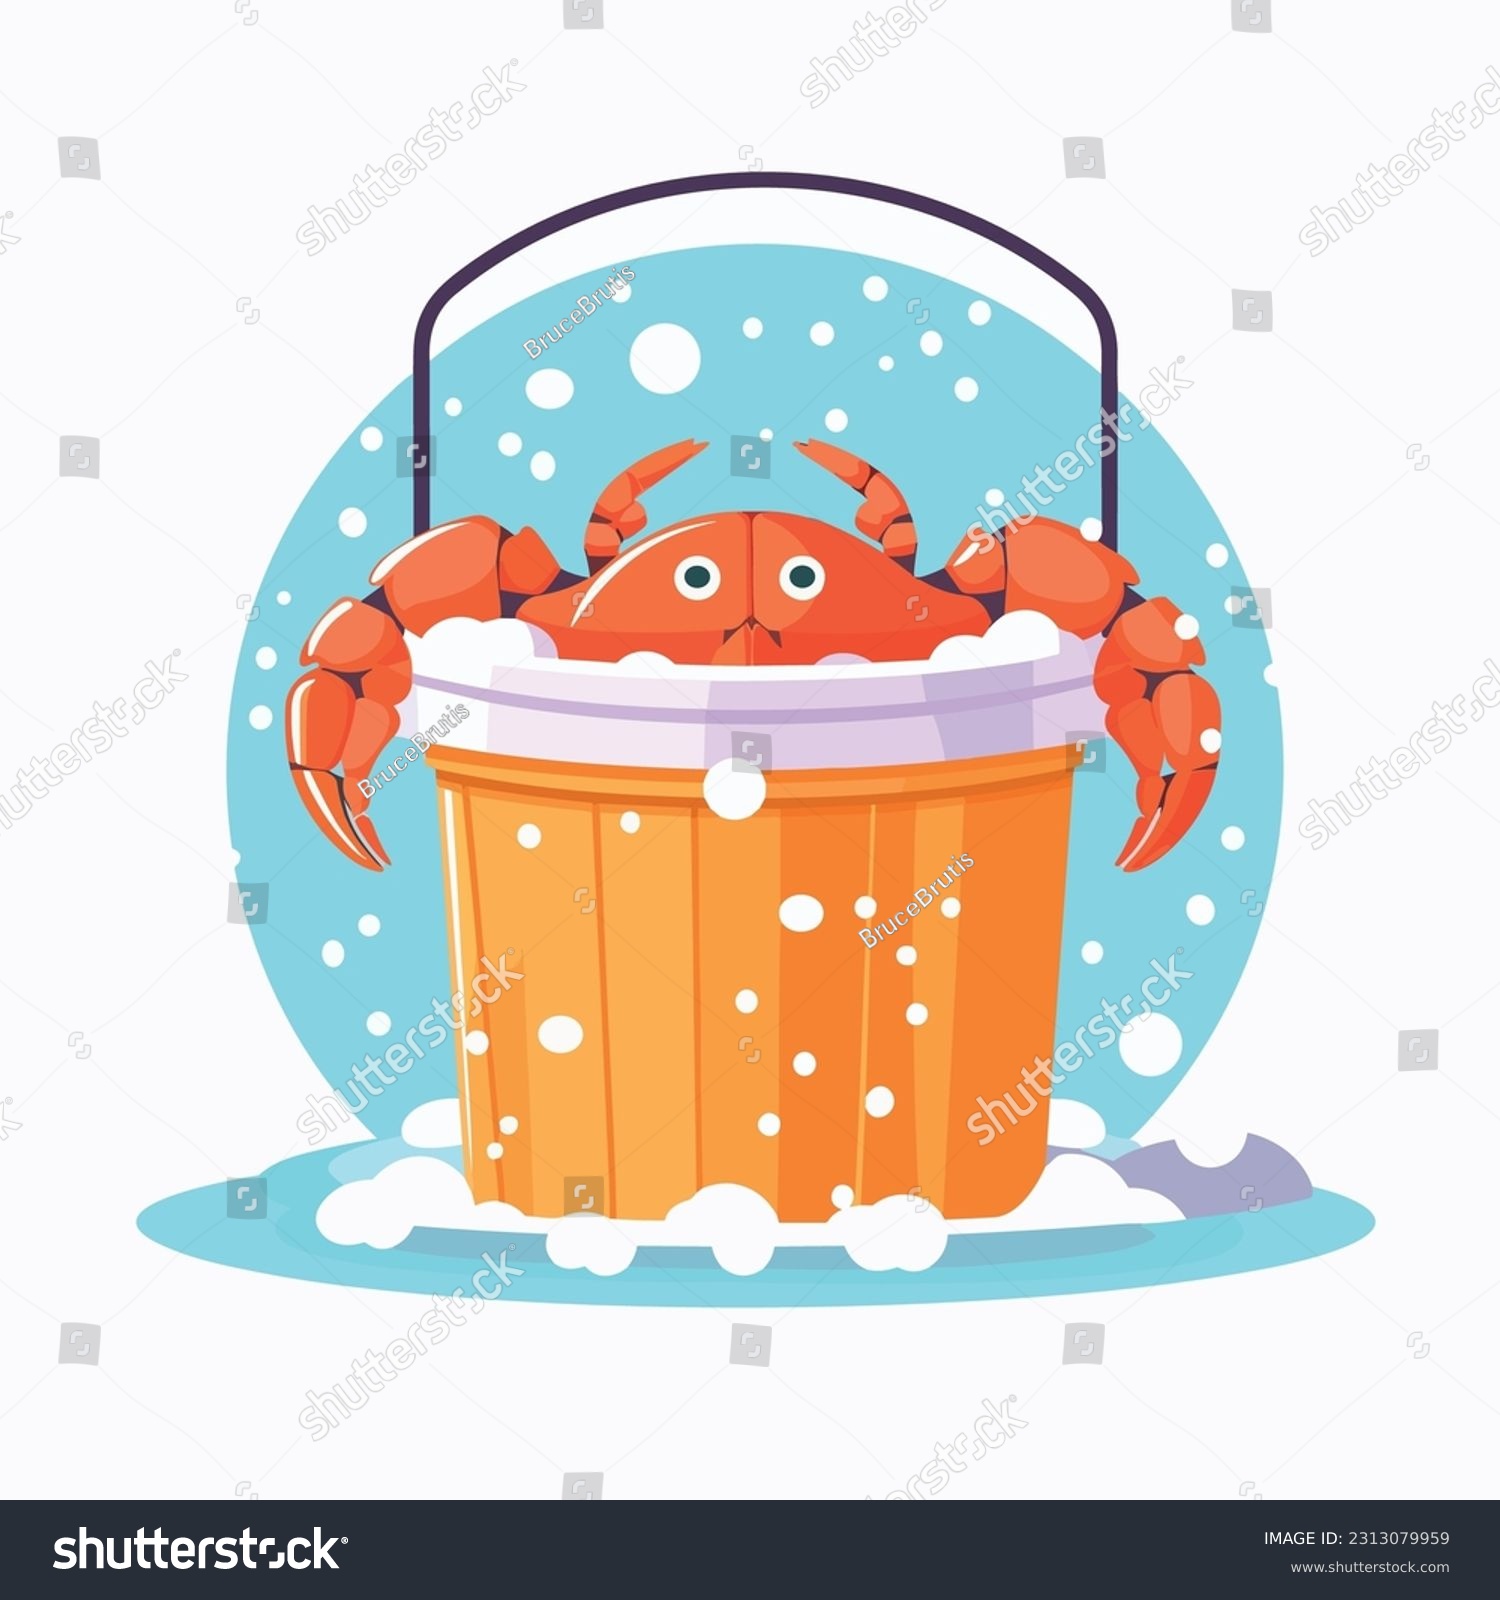 SVG of Scene of a crab bucket in a flat design. Iillustrations of crabs and a bucket svg